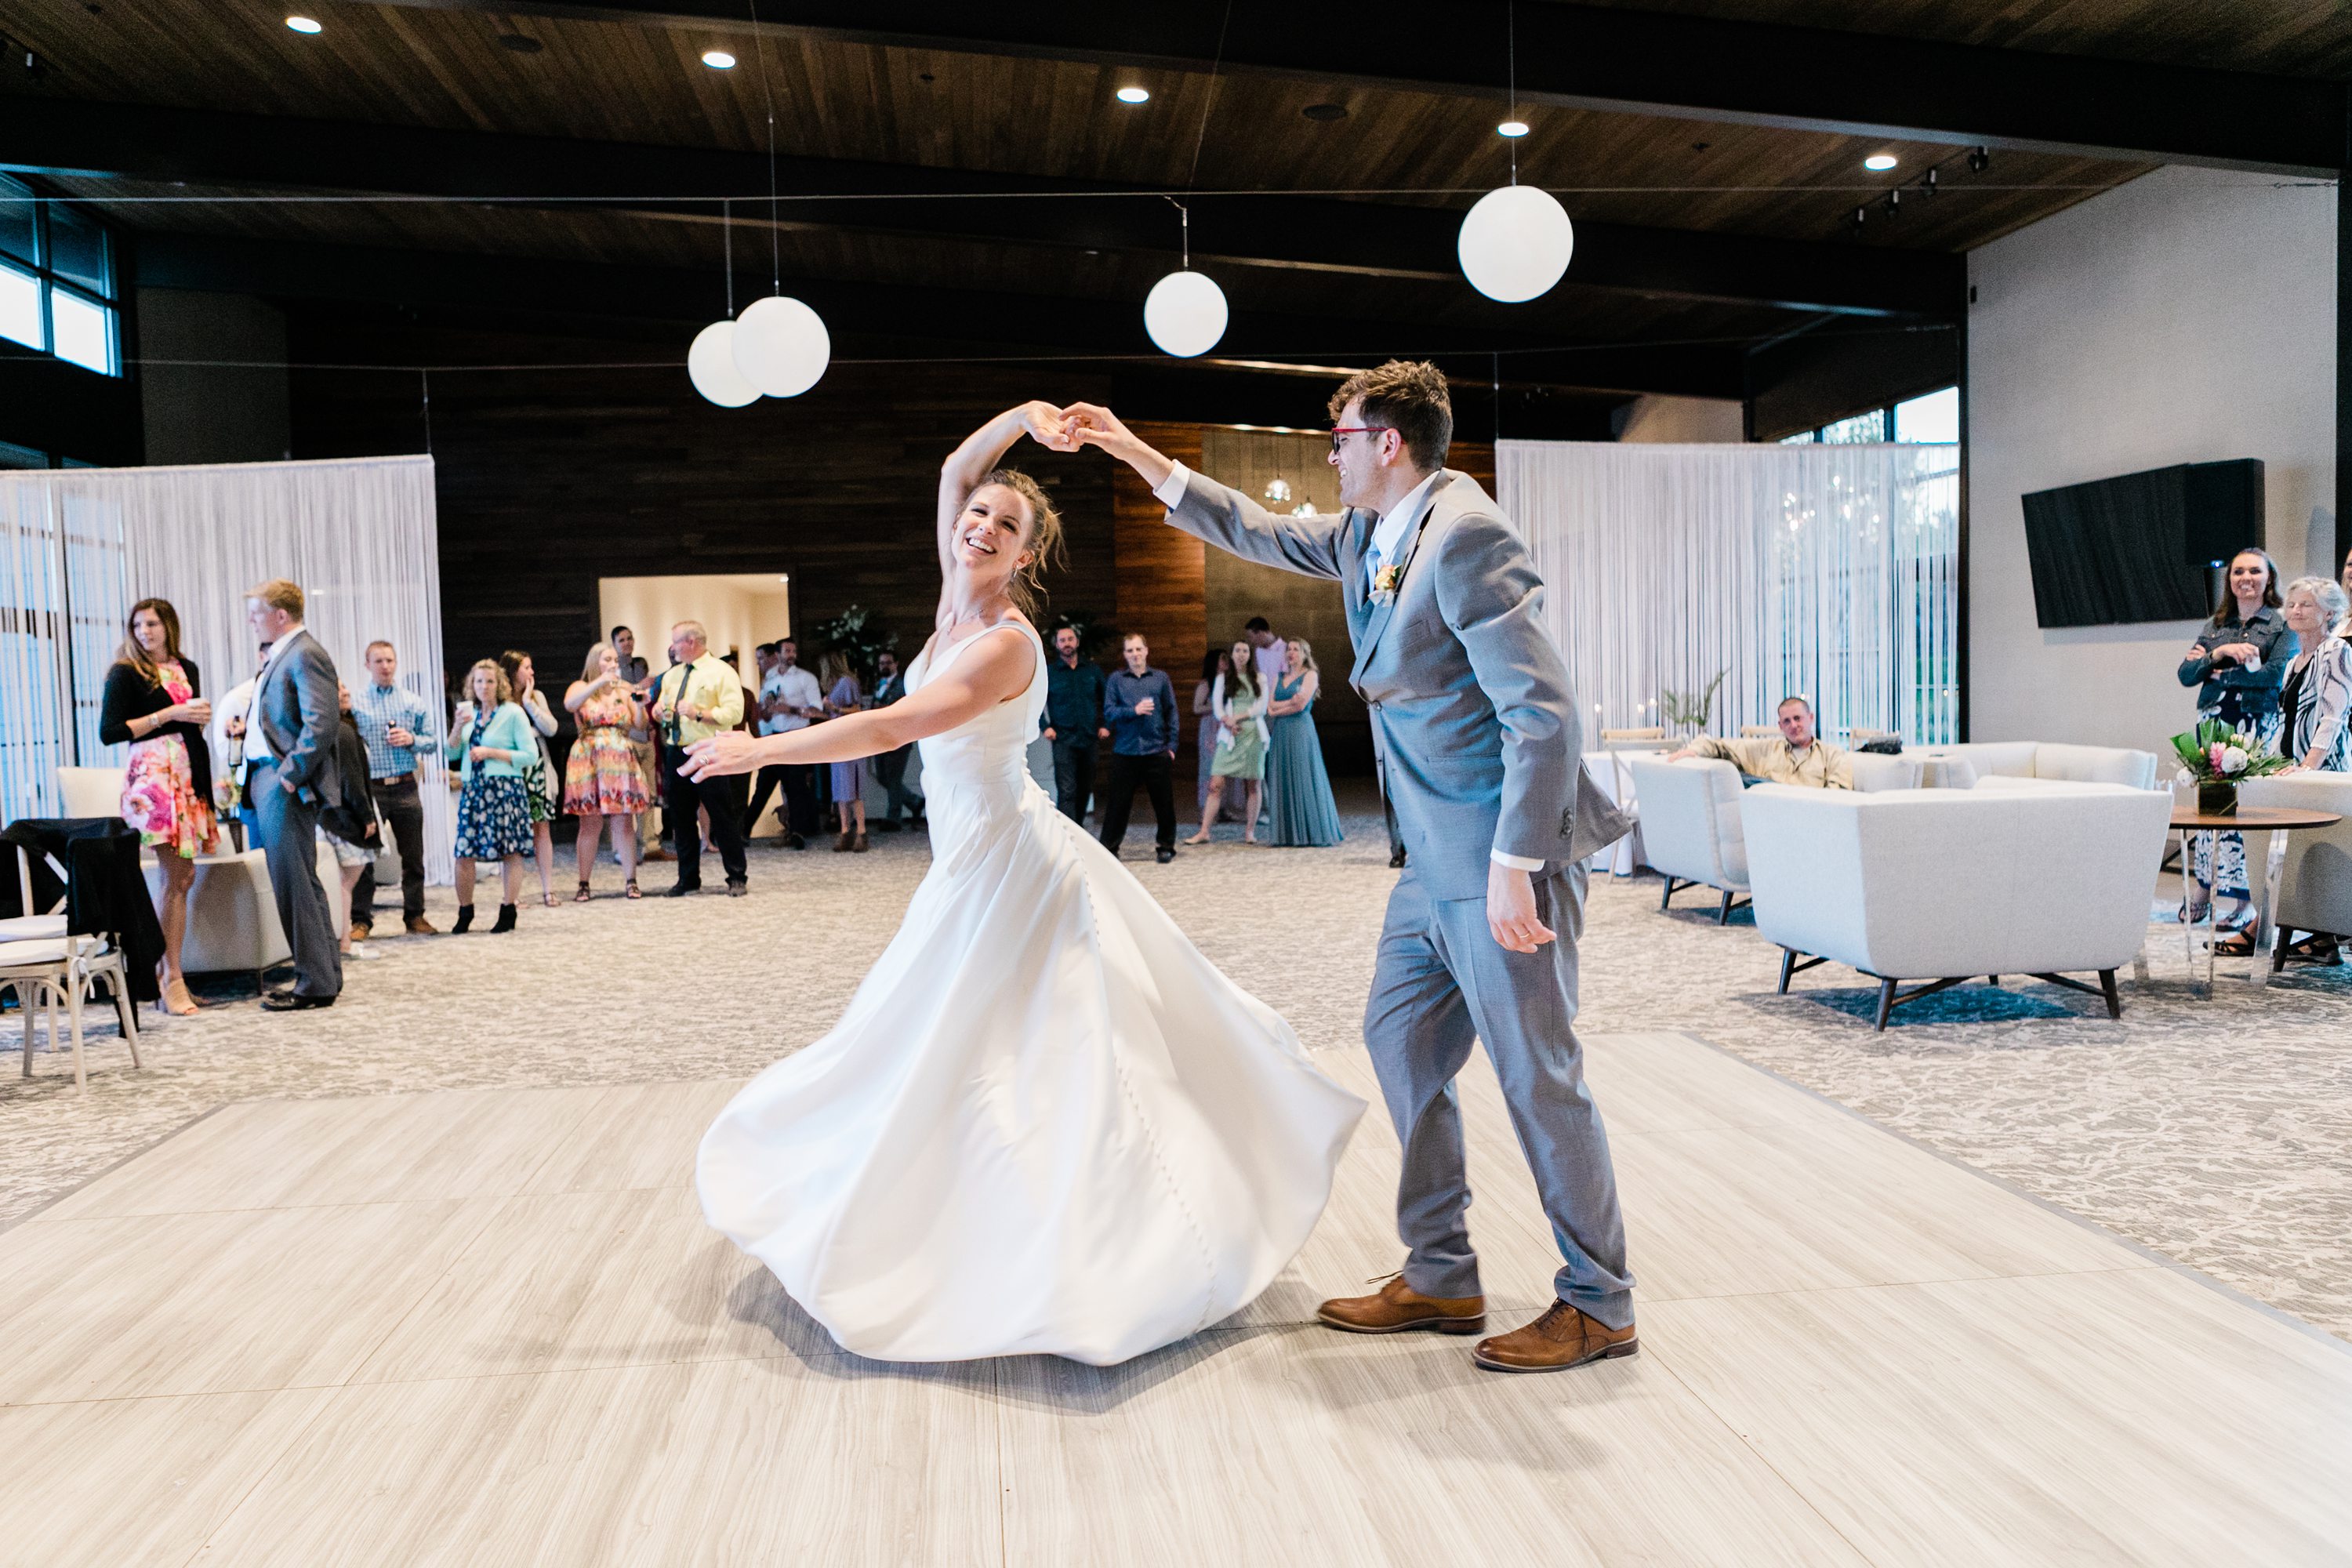 eagle idaho wedding venues,first dance photos,bride and groom first dance